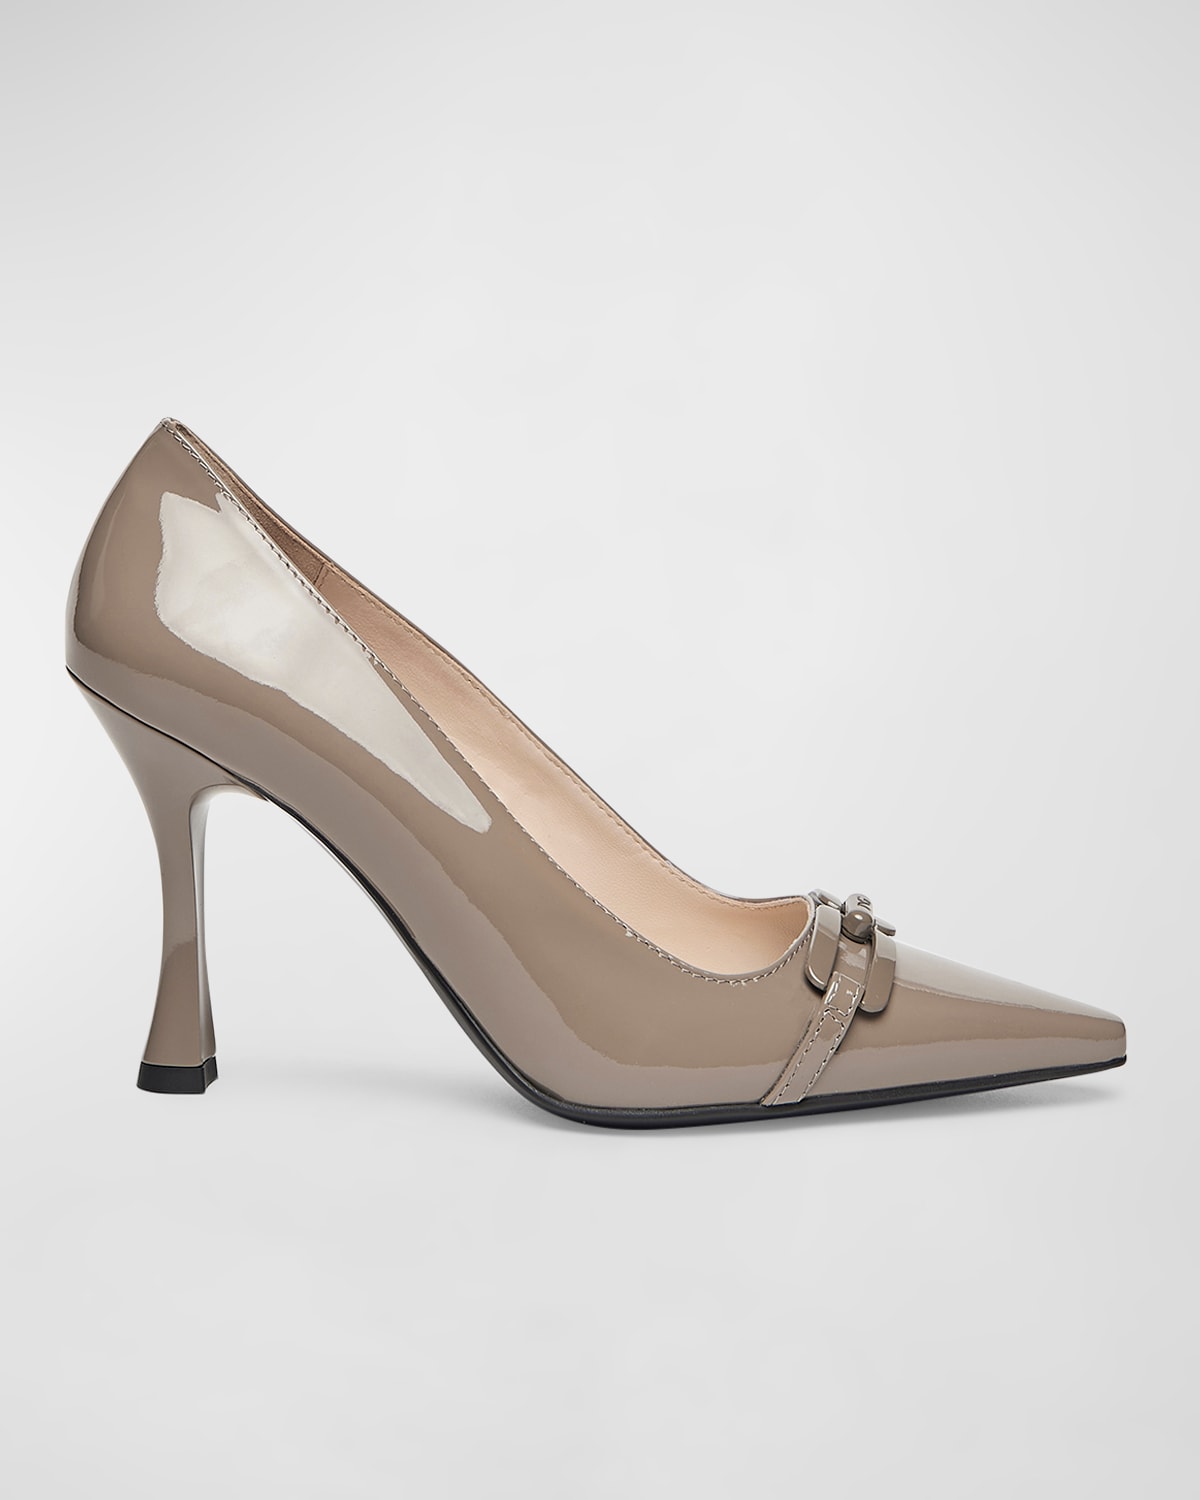 Nerogiardini Links Patent Leather Pumps In Brown